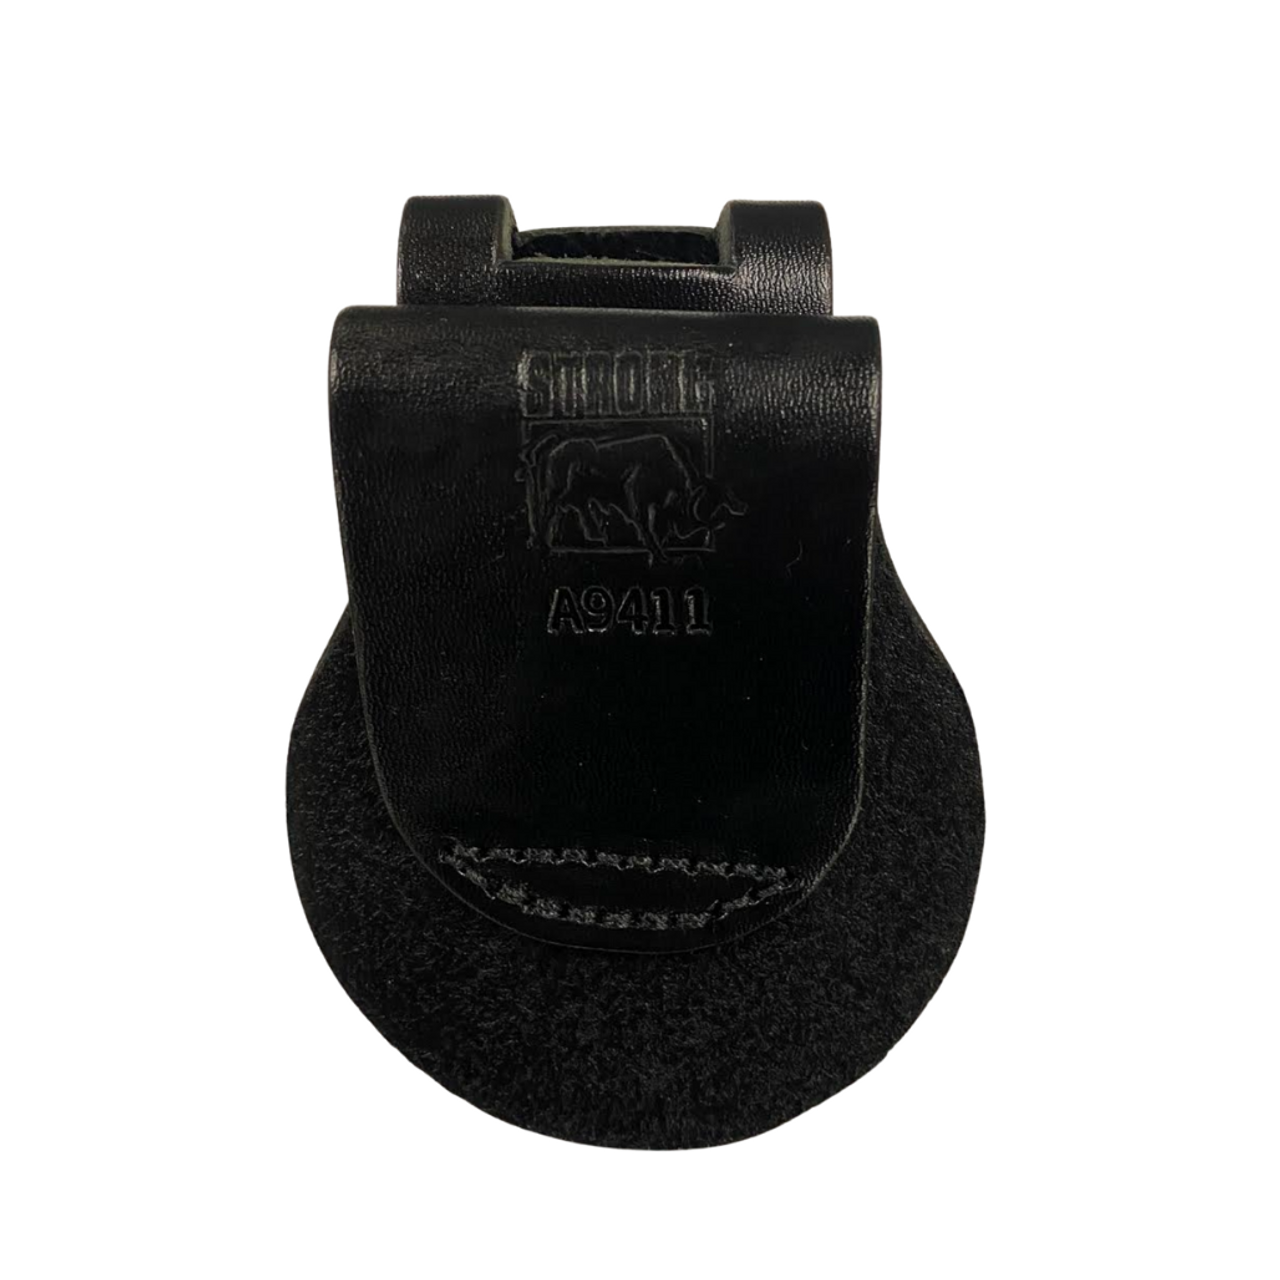 Duty Quick Release Handcuff Holder in Plain Leather